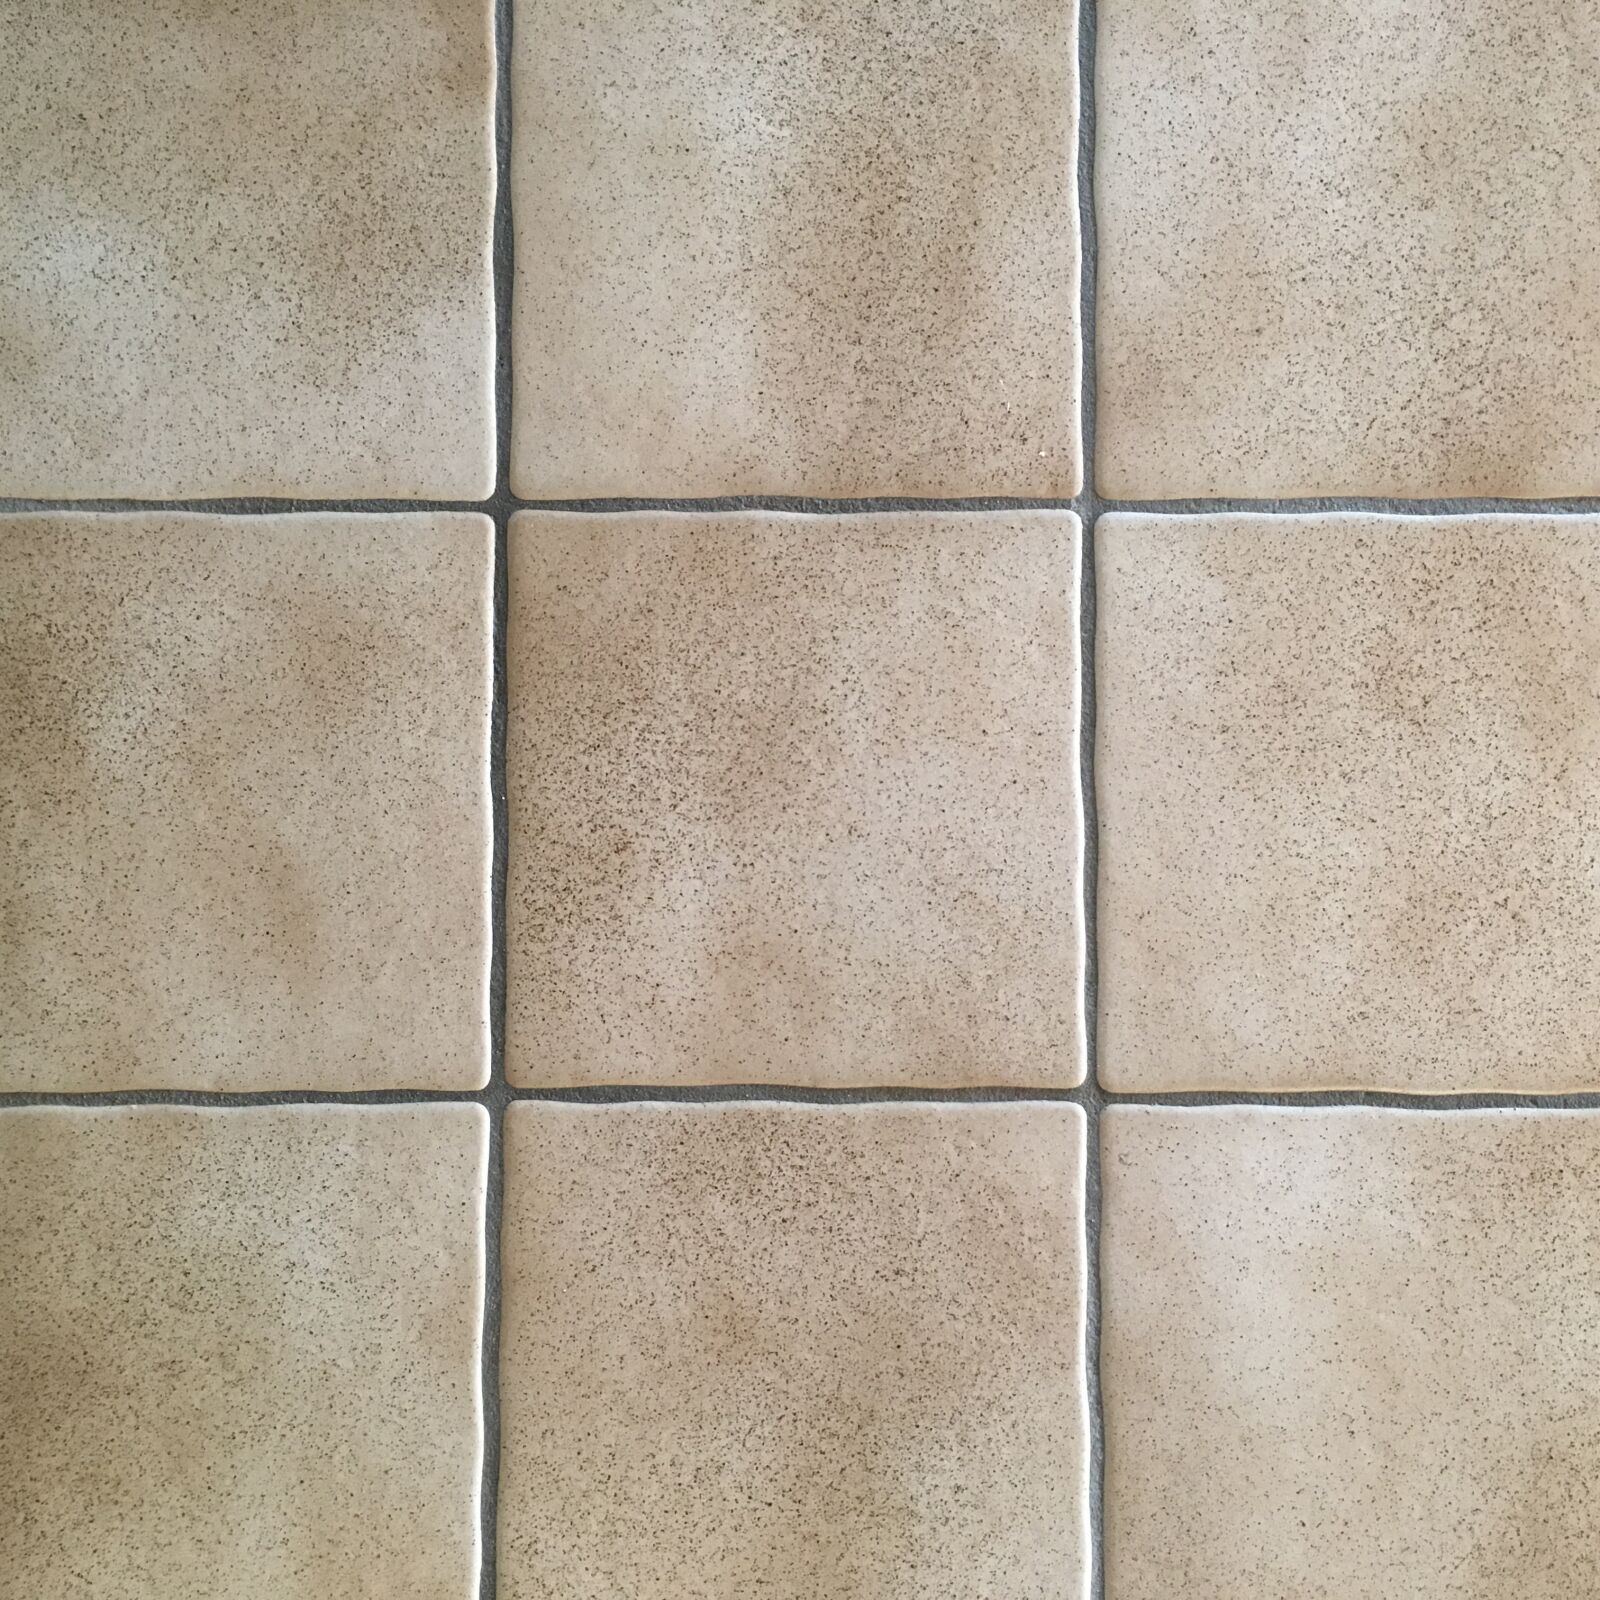 Apple iPhone 6s sample photo. Tile, flow, 3x3 photography